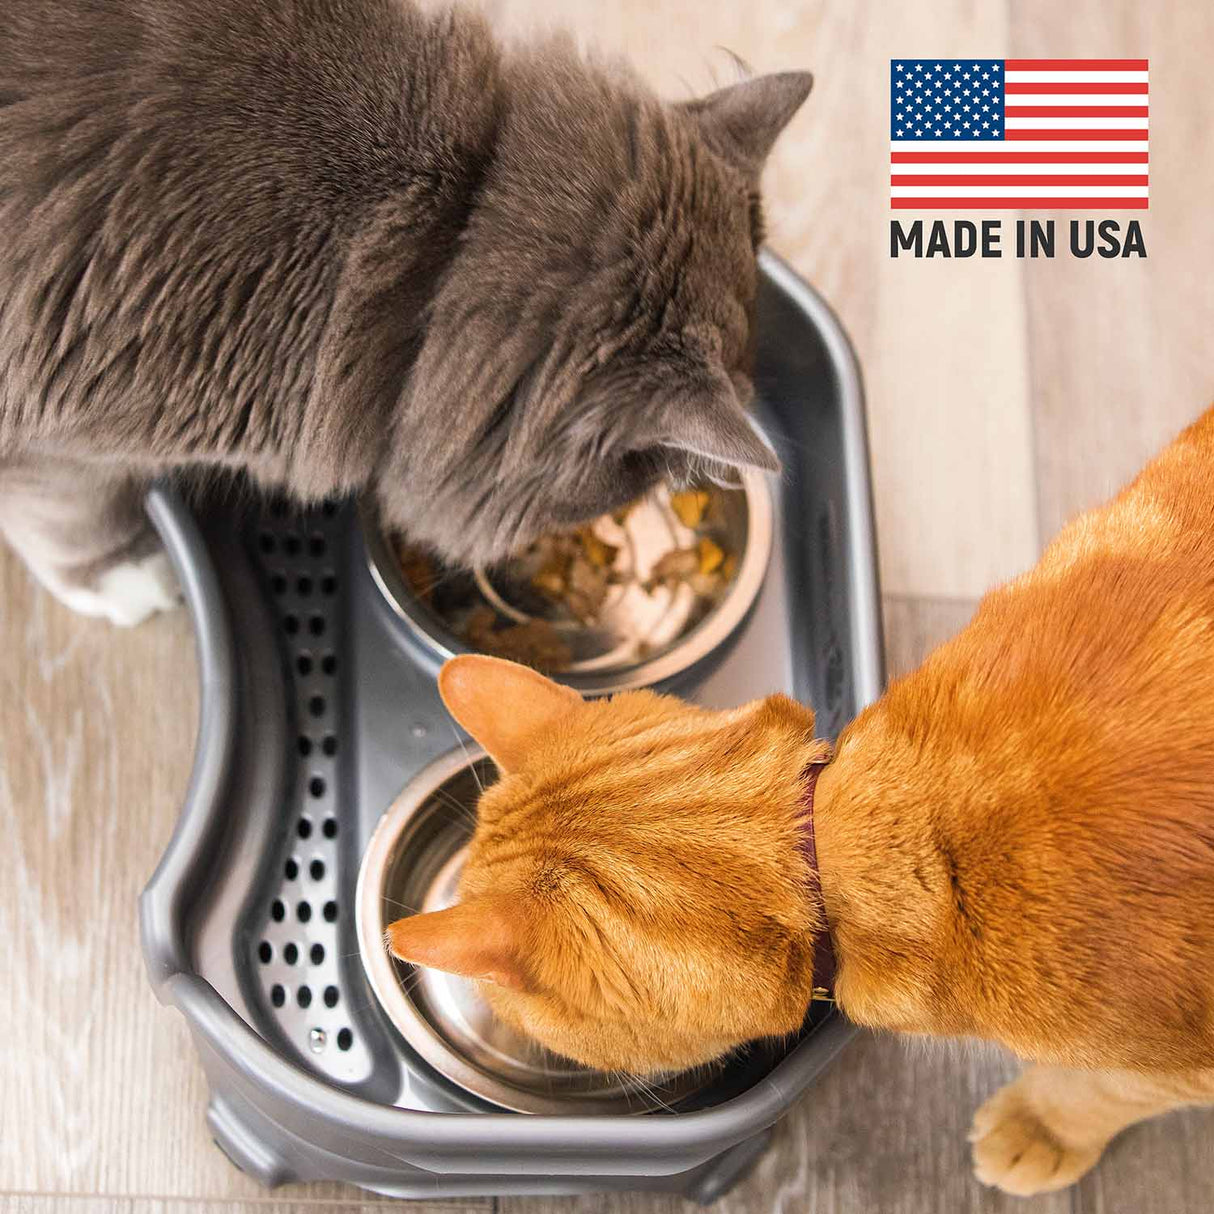 Cats eating from Gunmetal Express that is Made in the USA